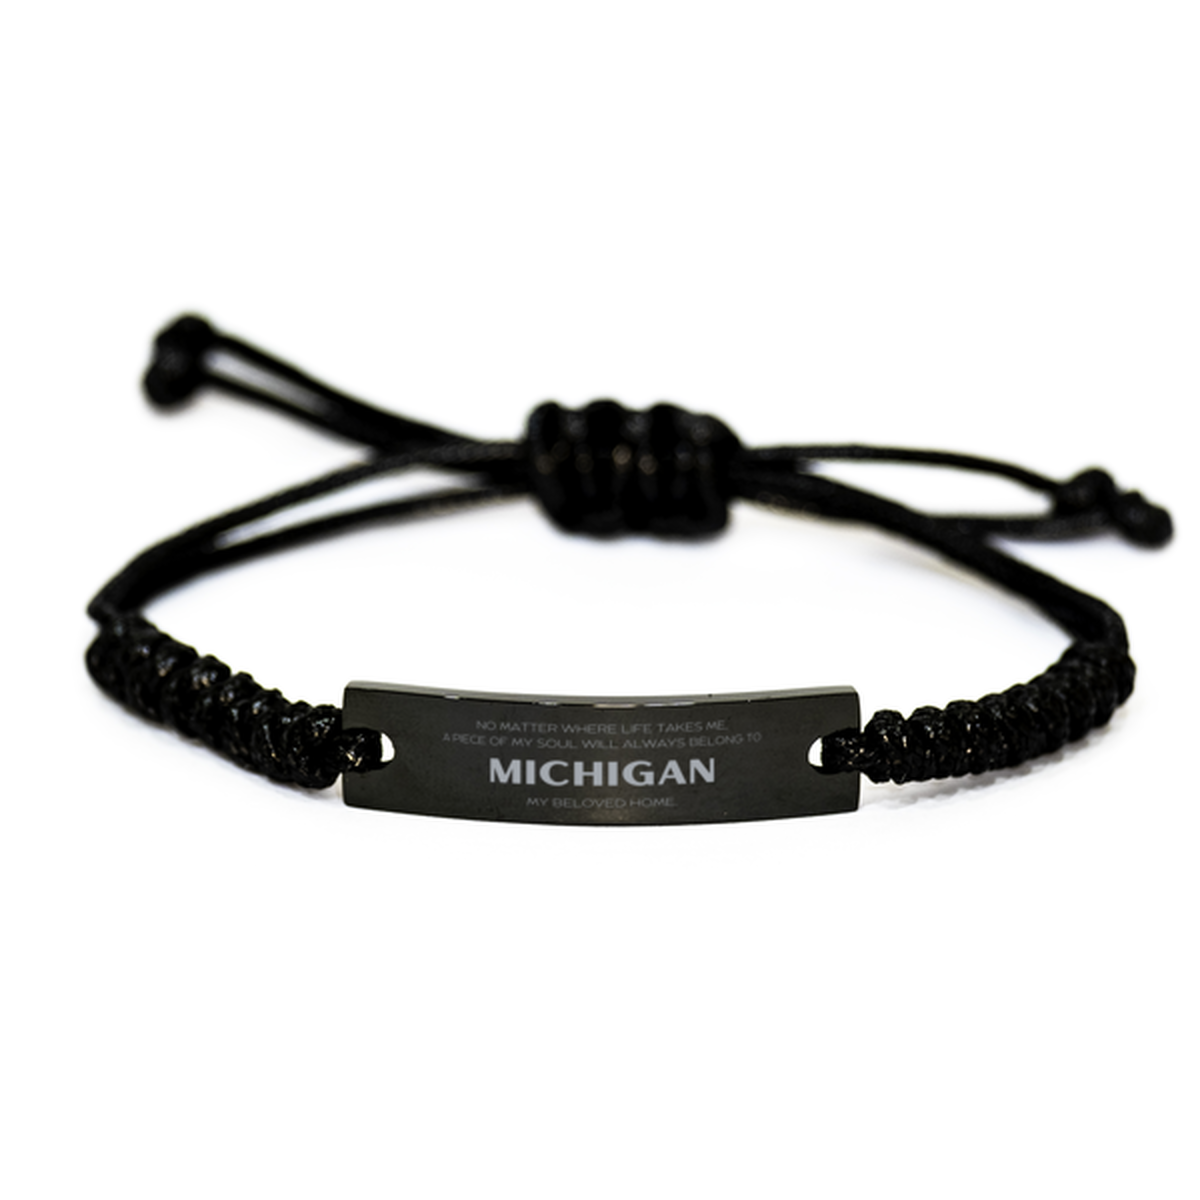 Love Michigan State Gifts, My soul will always belong to Michigan, Proud Black Rope Bracelet, Birthday Unique Gifts For Michigan Men, Women, Friends